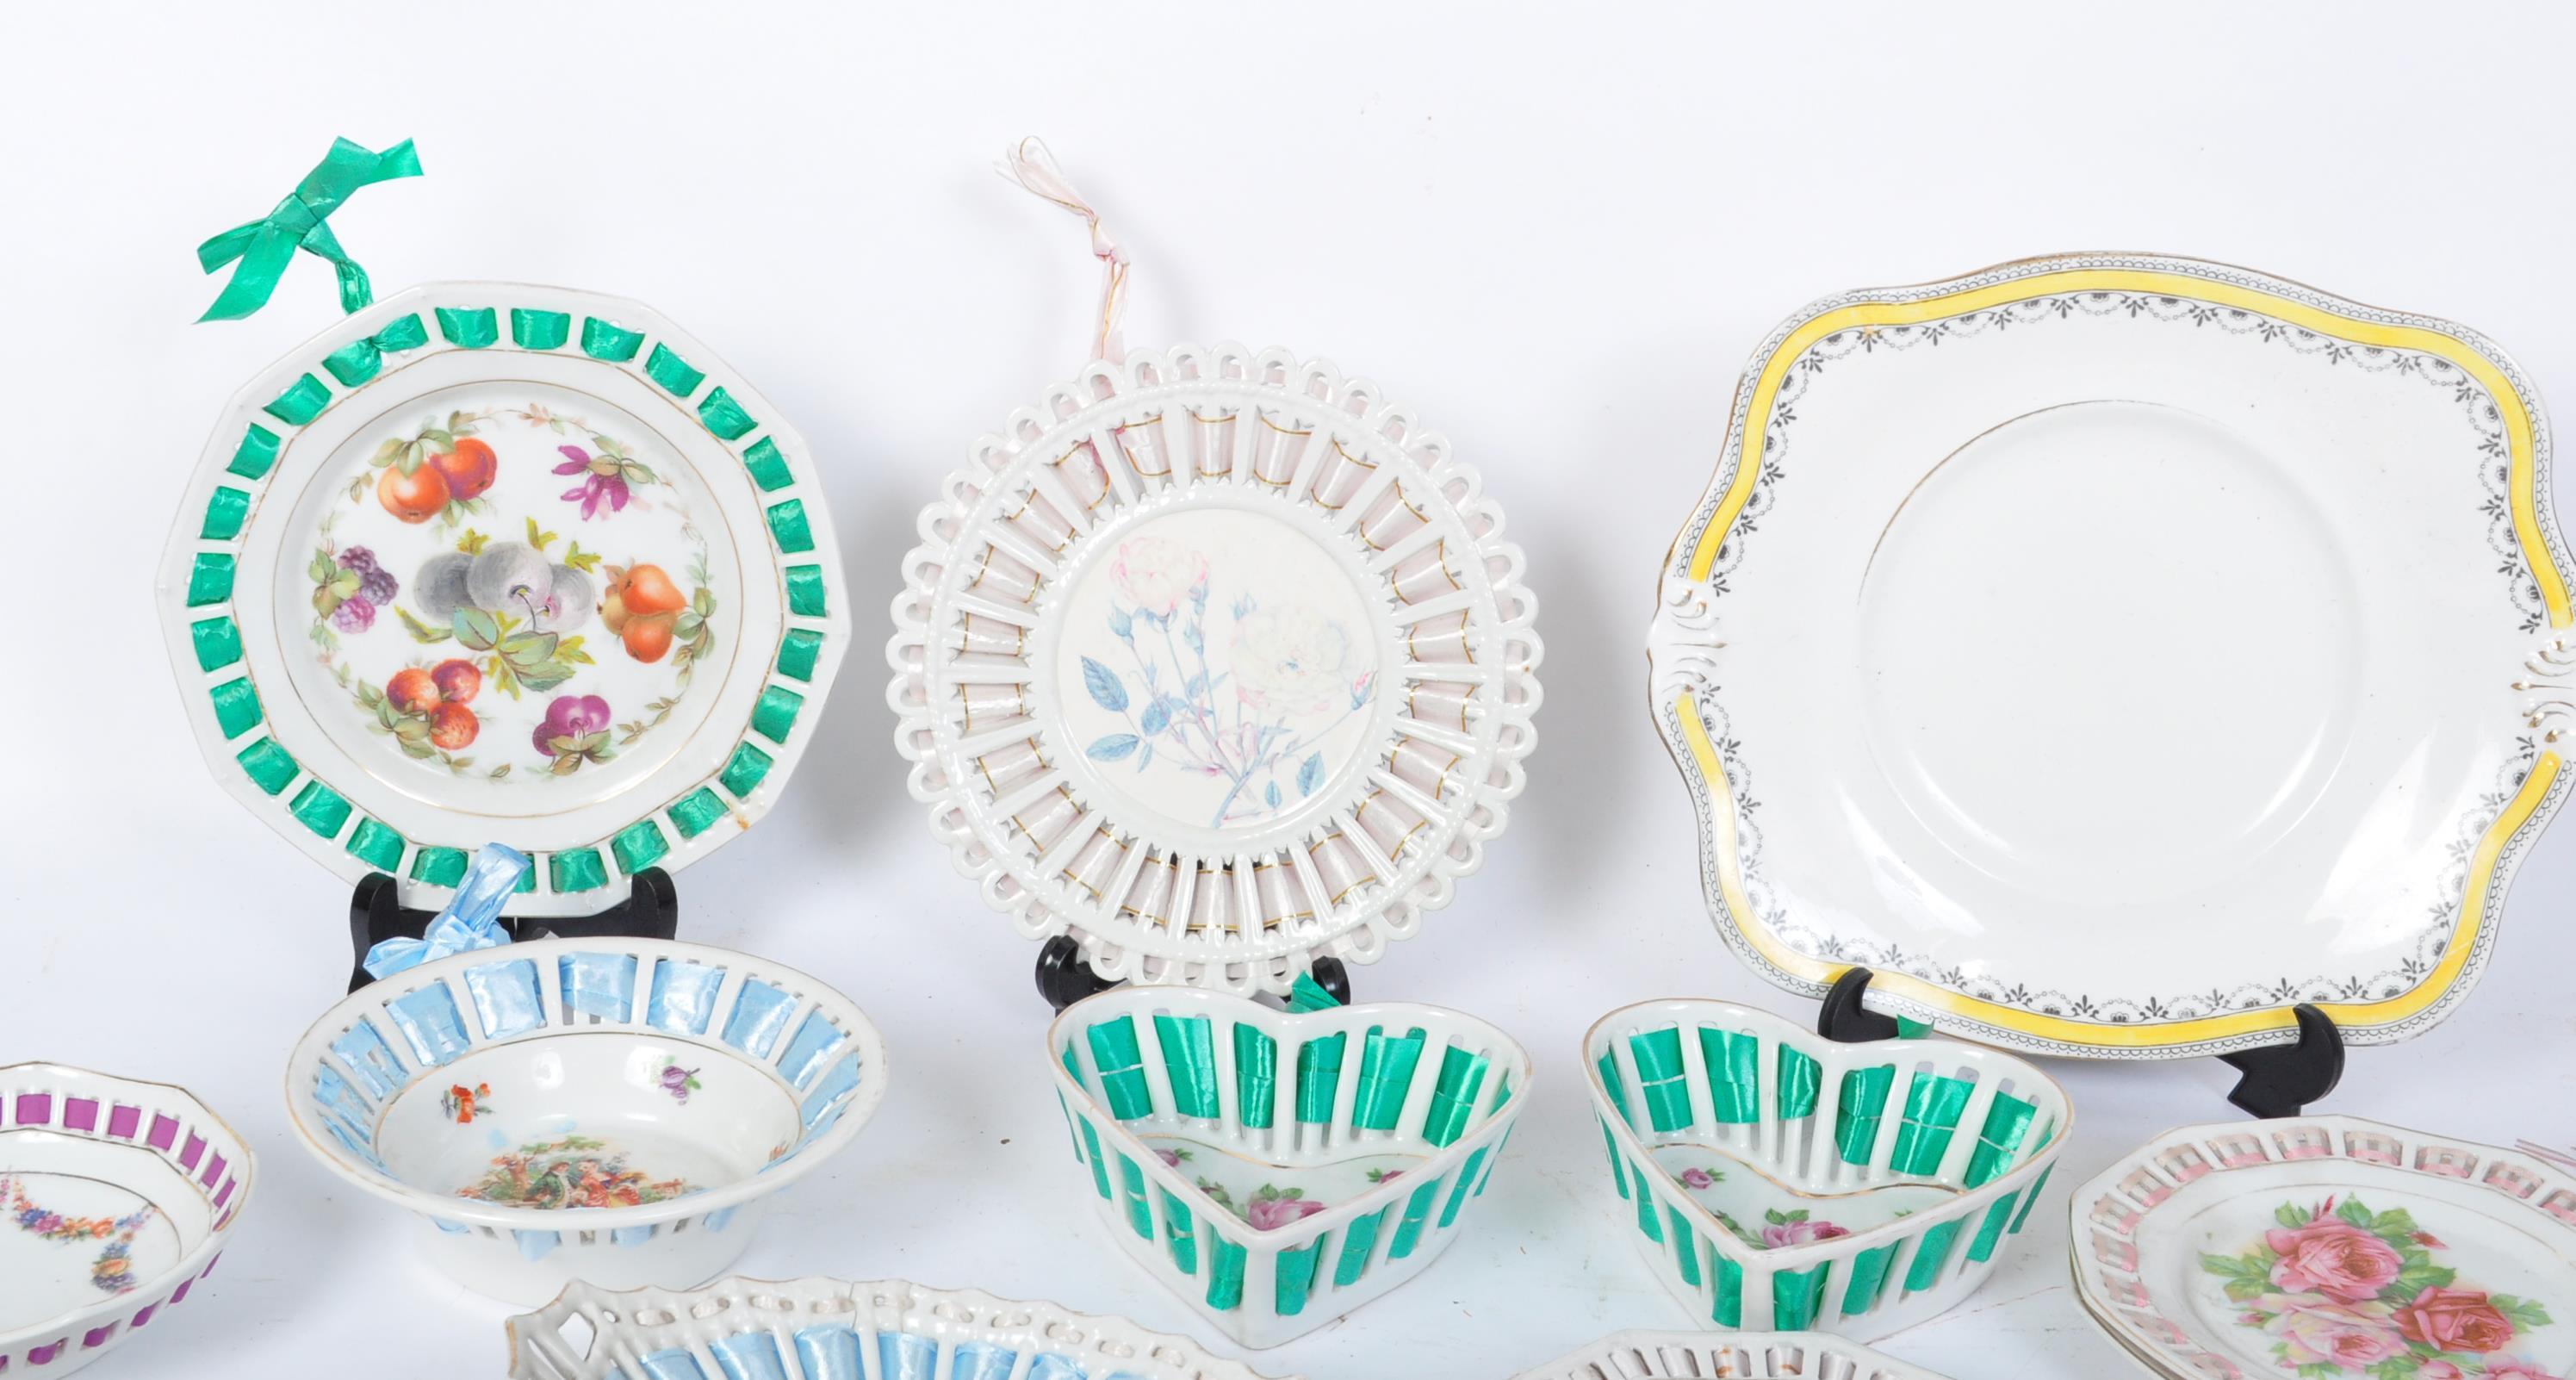 ASSORTMENT OF 19TH CENTURY RIBBON PLATES & DISHES - Image 2 of 7